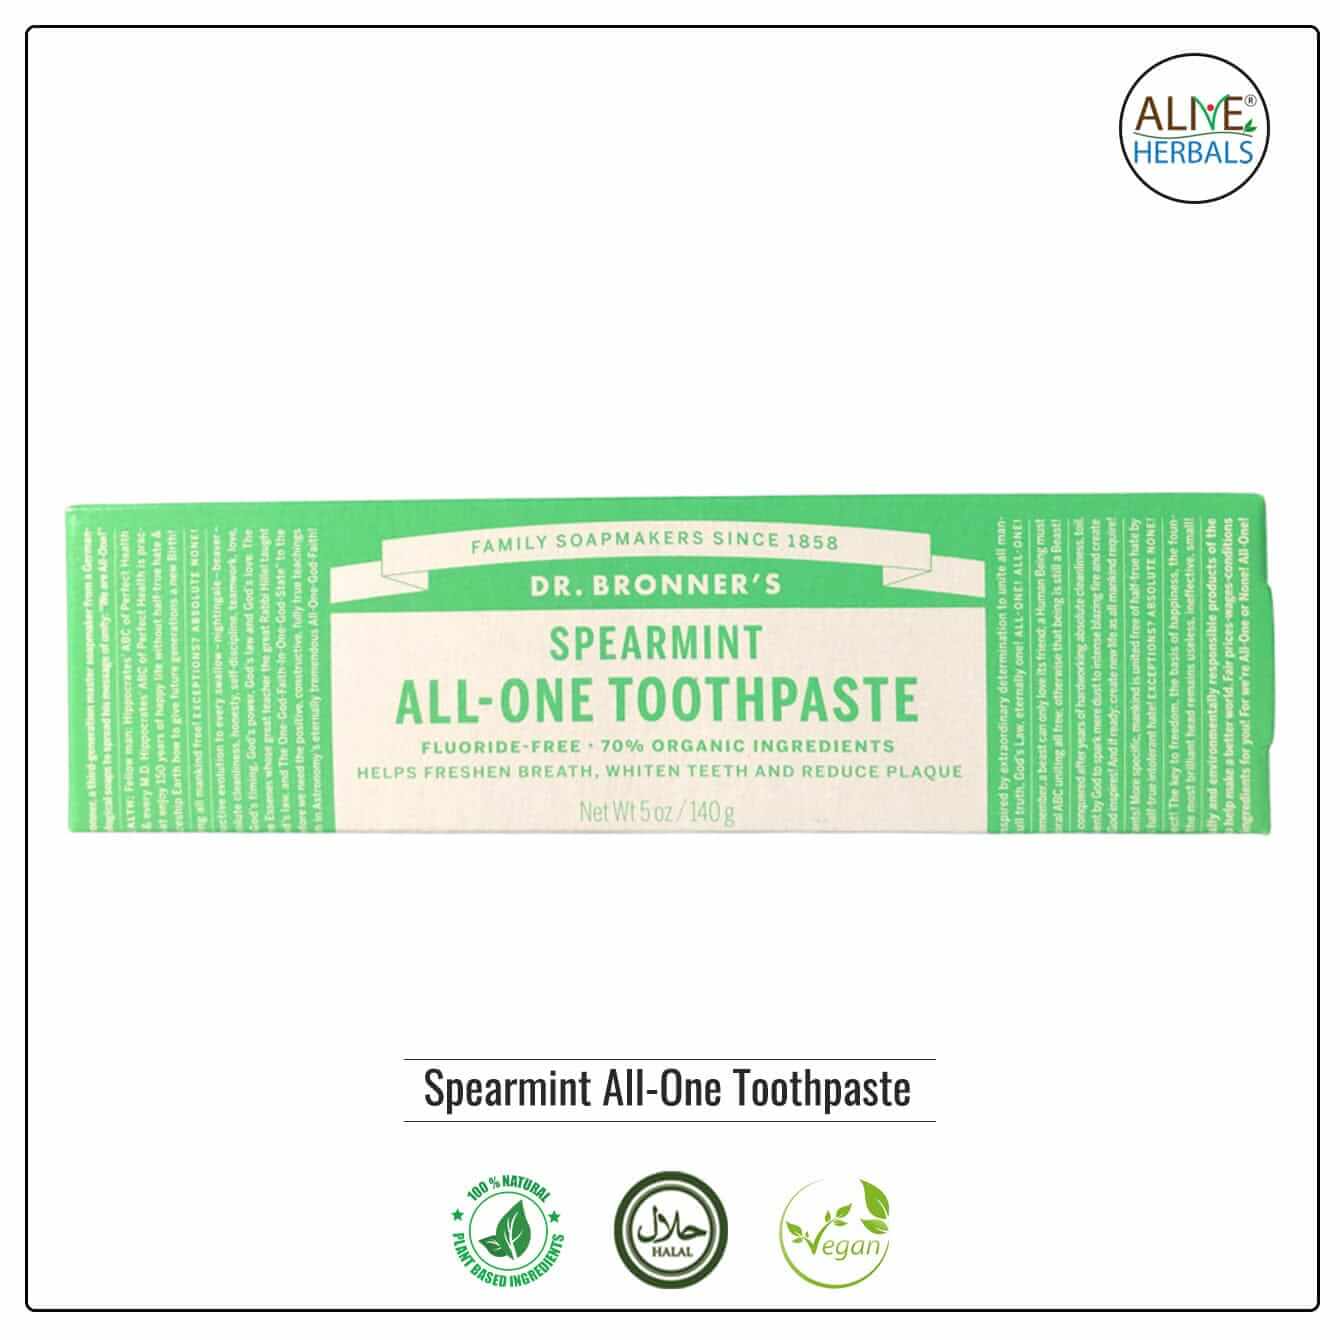 Spearmint All-One Toothpaste - Buy at Natural Food Store | Alive Herbals.